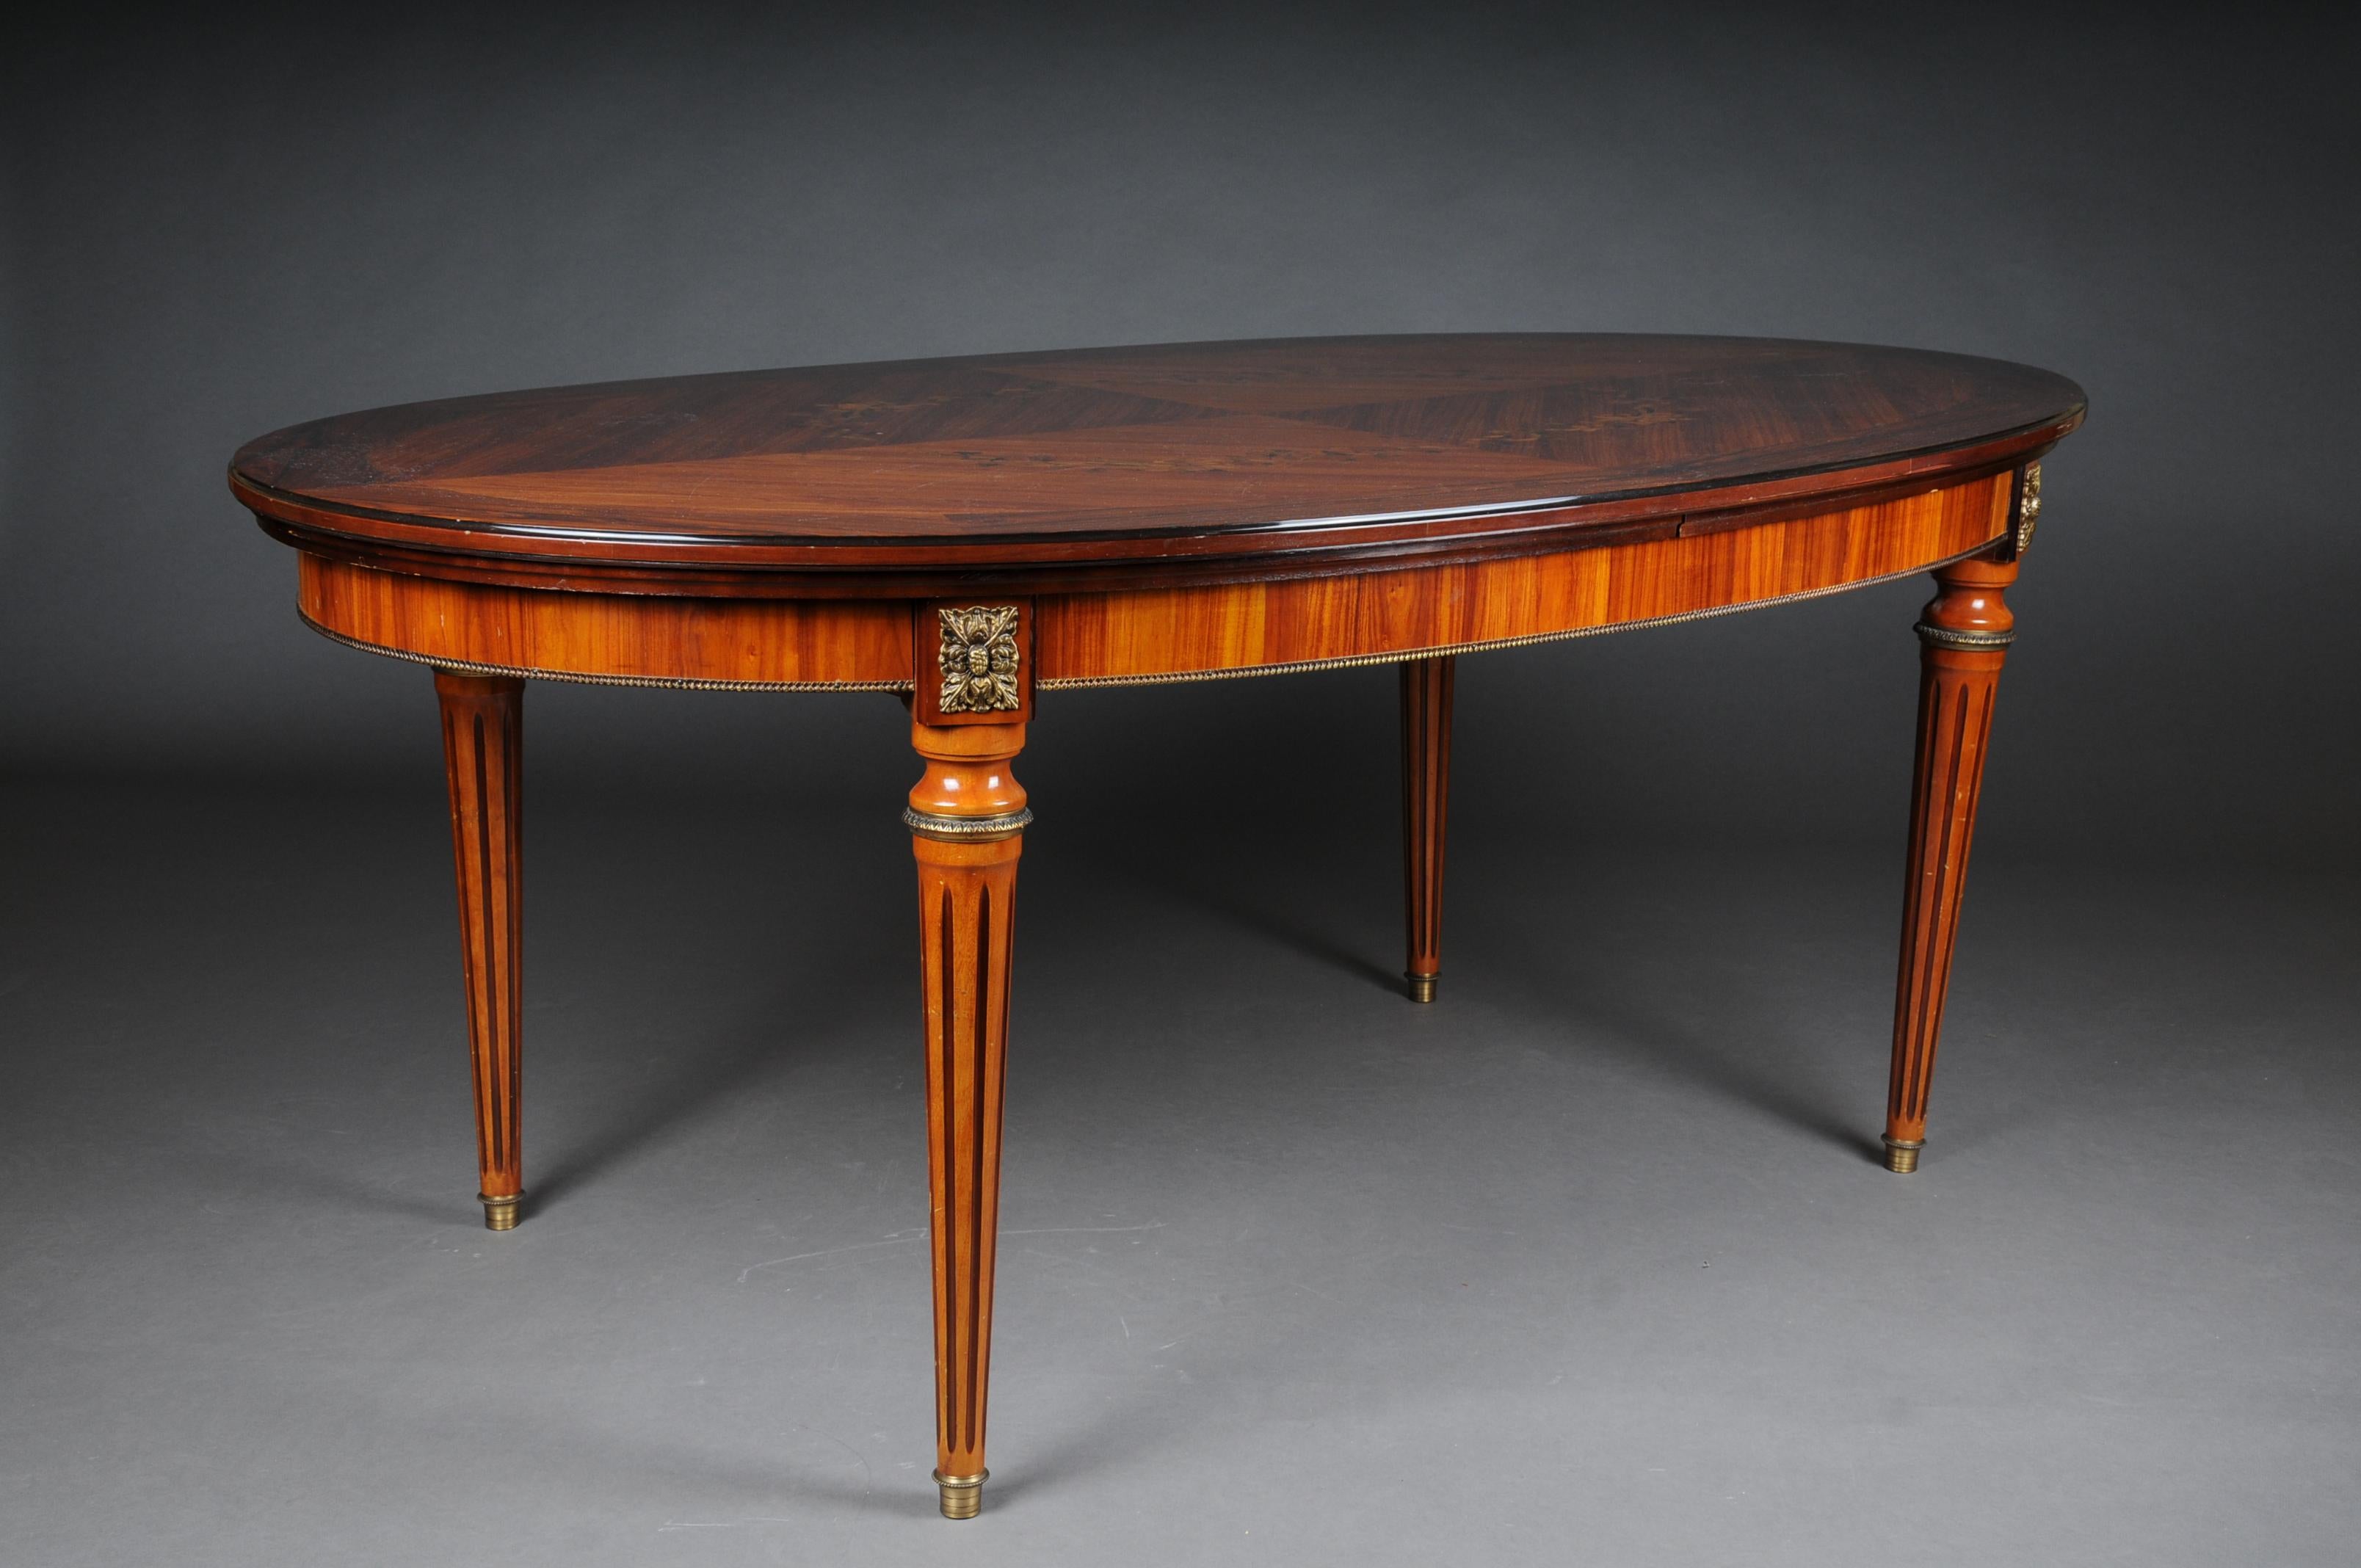 Beautiful Louis XVI dining room table / table 20th century extendable

Solid wood veneered and inlaid. Oval top plate with brass fittings. Pointed and fluted legs ending in brass sabots. Extendable table top.
Extended 273 cm.

The chairs are